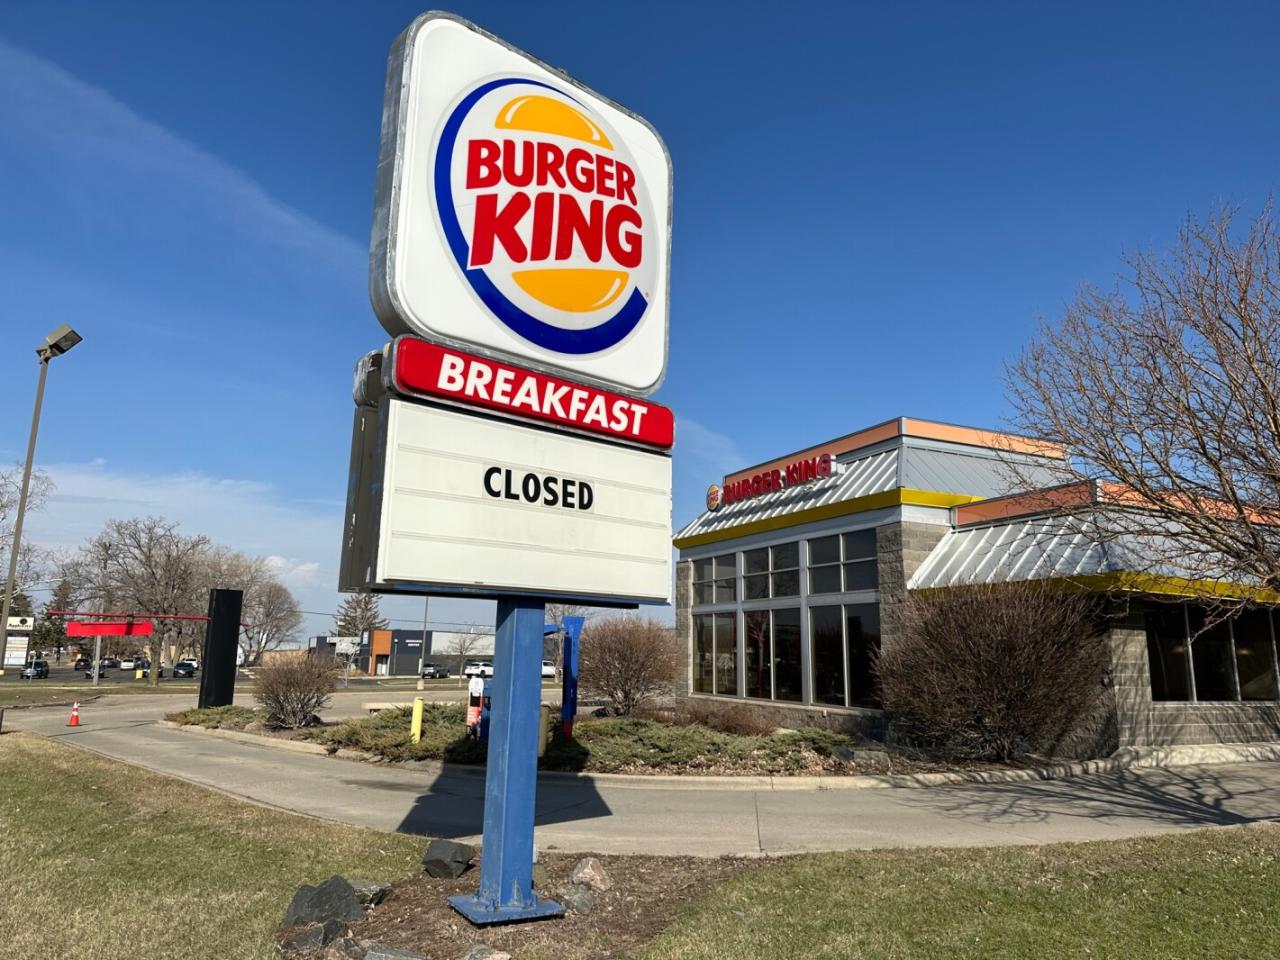 Franchisee closes Burger King sites in Willmar, Litchfield, Montevideo,  Redwood Falls and in Upper Midwest - West Central Tribune | News, weather,  sports from Willmar Minnesota